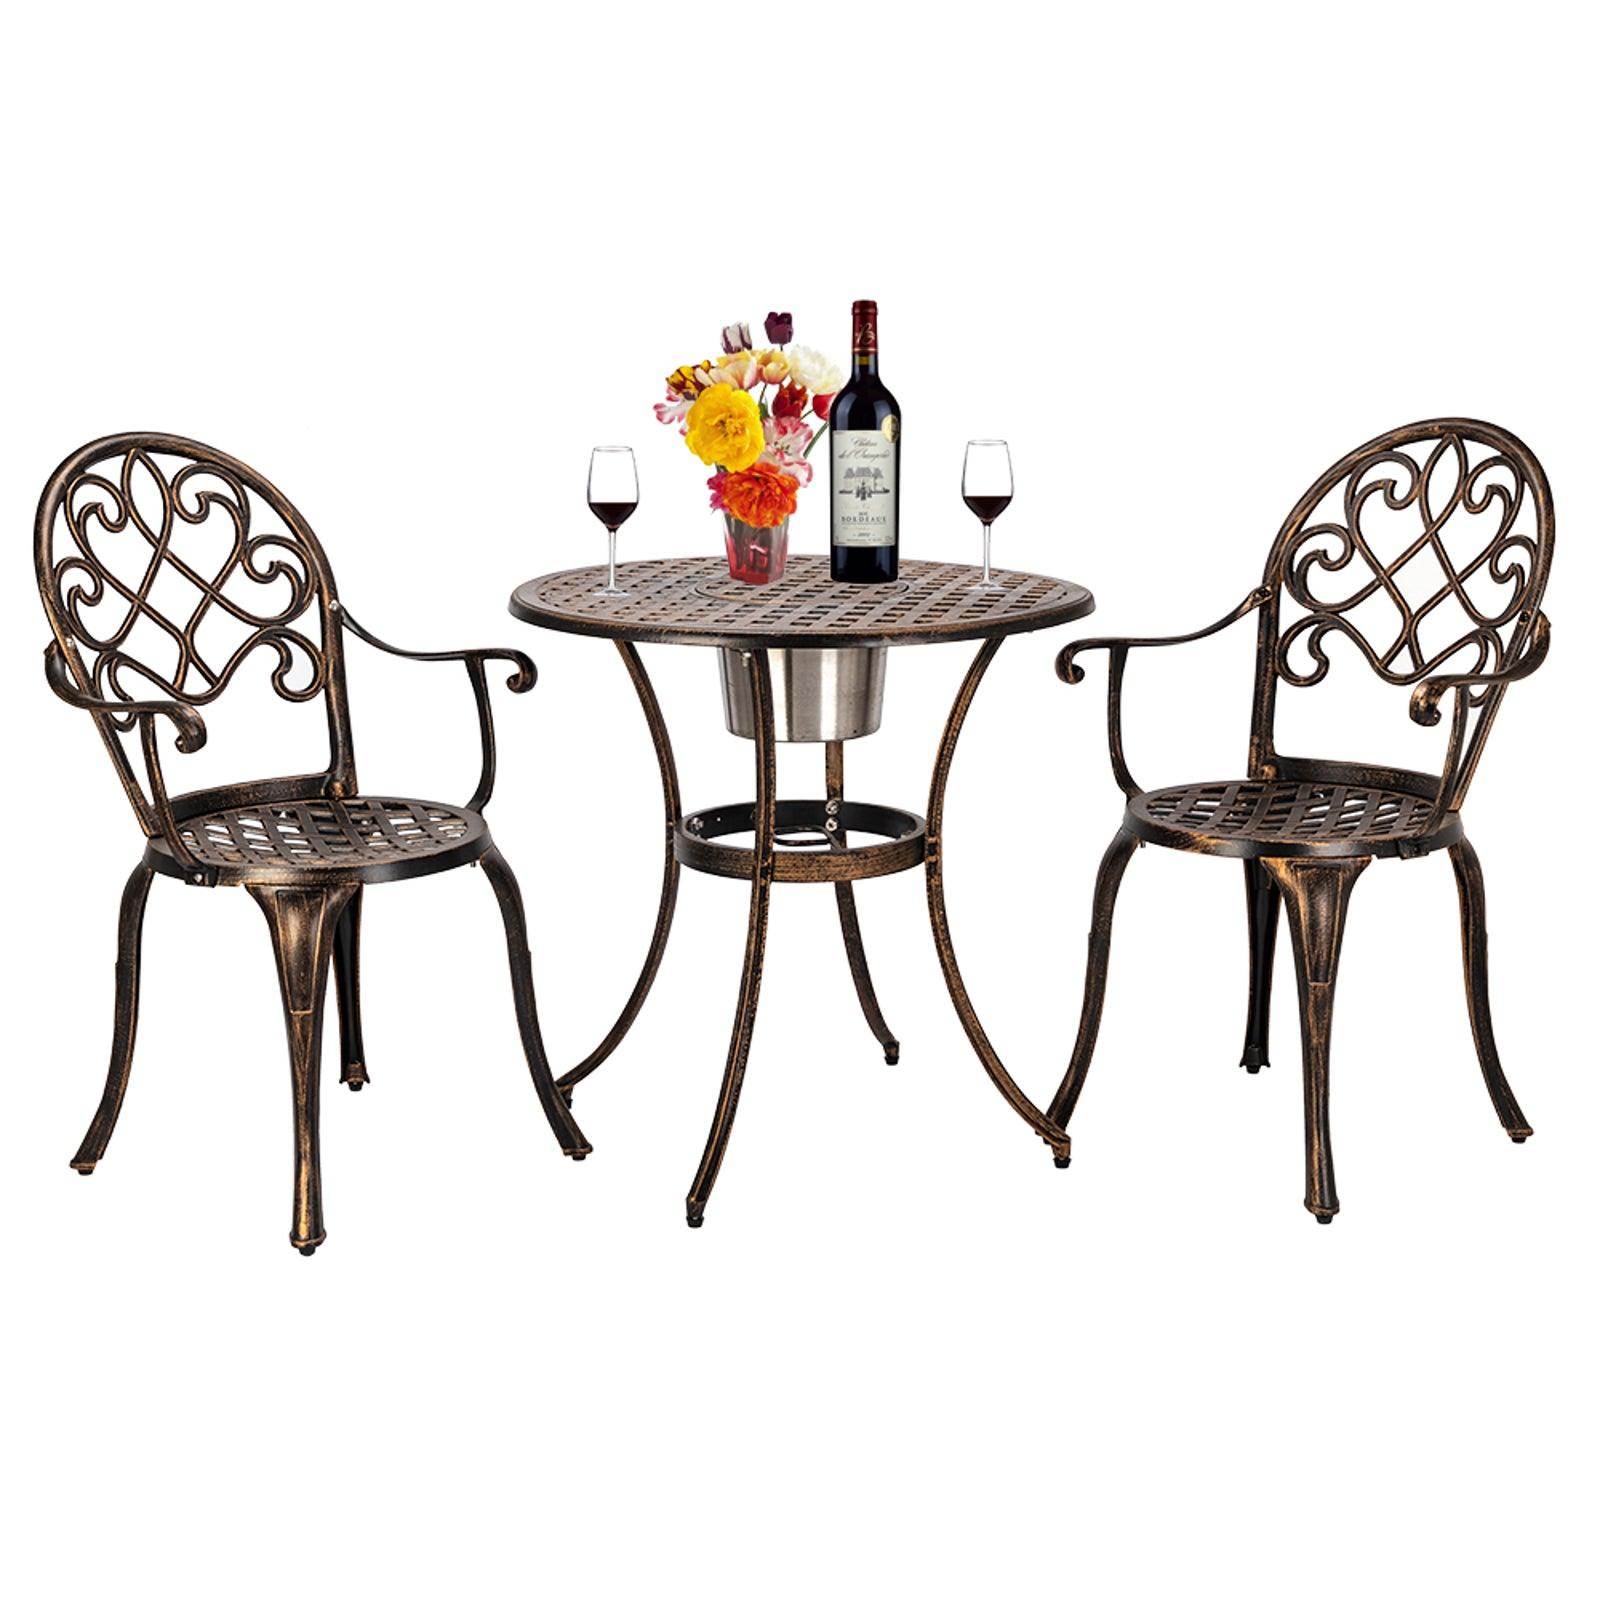 Outdoor 3 Piece Patio Bistro Set of Table and Chairs with Ice Bucket, Bronze, European Style Cast Aluminum - Charming Spaces